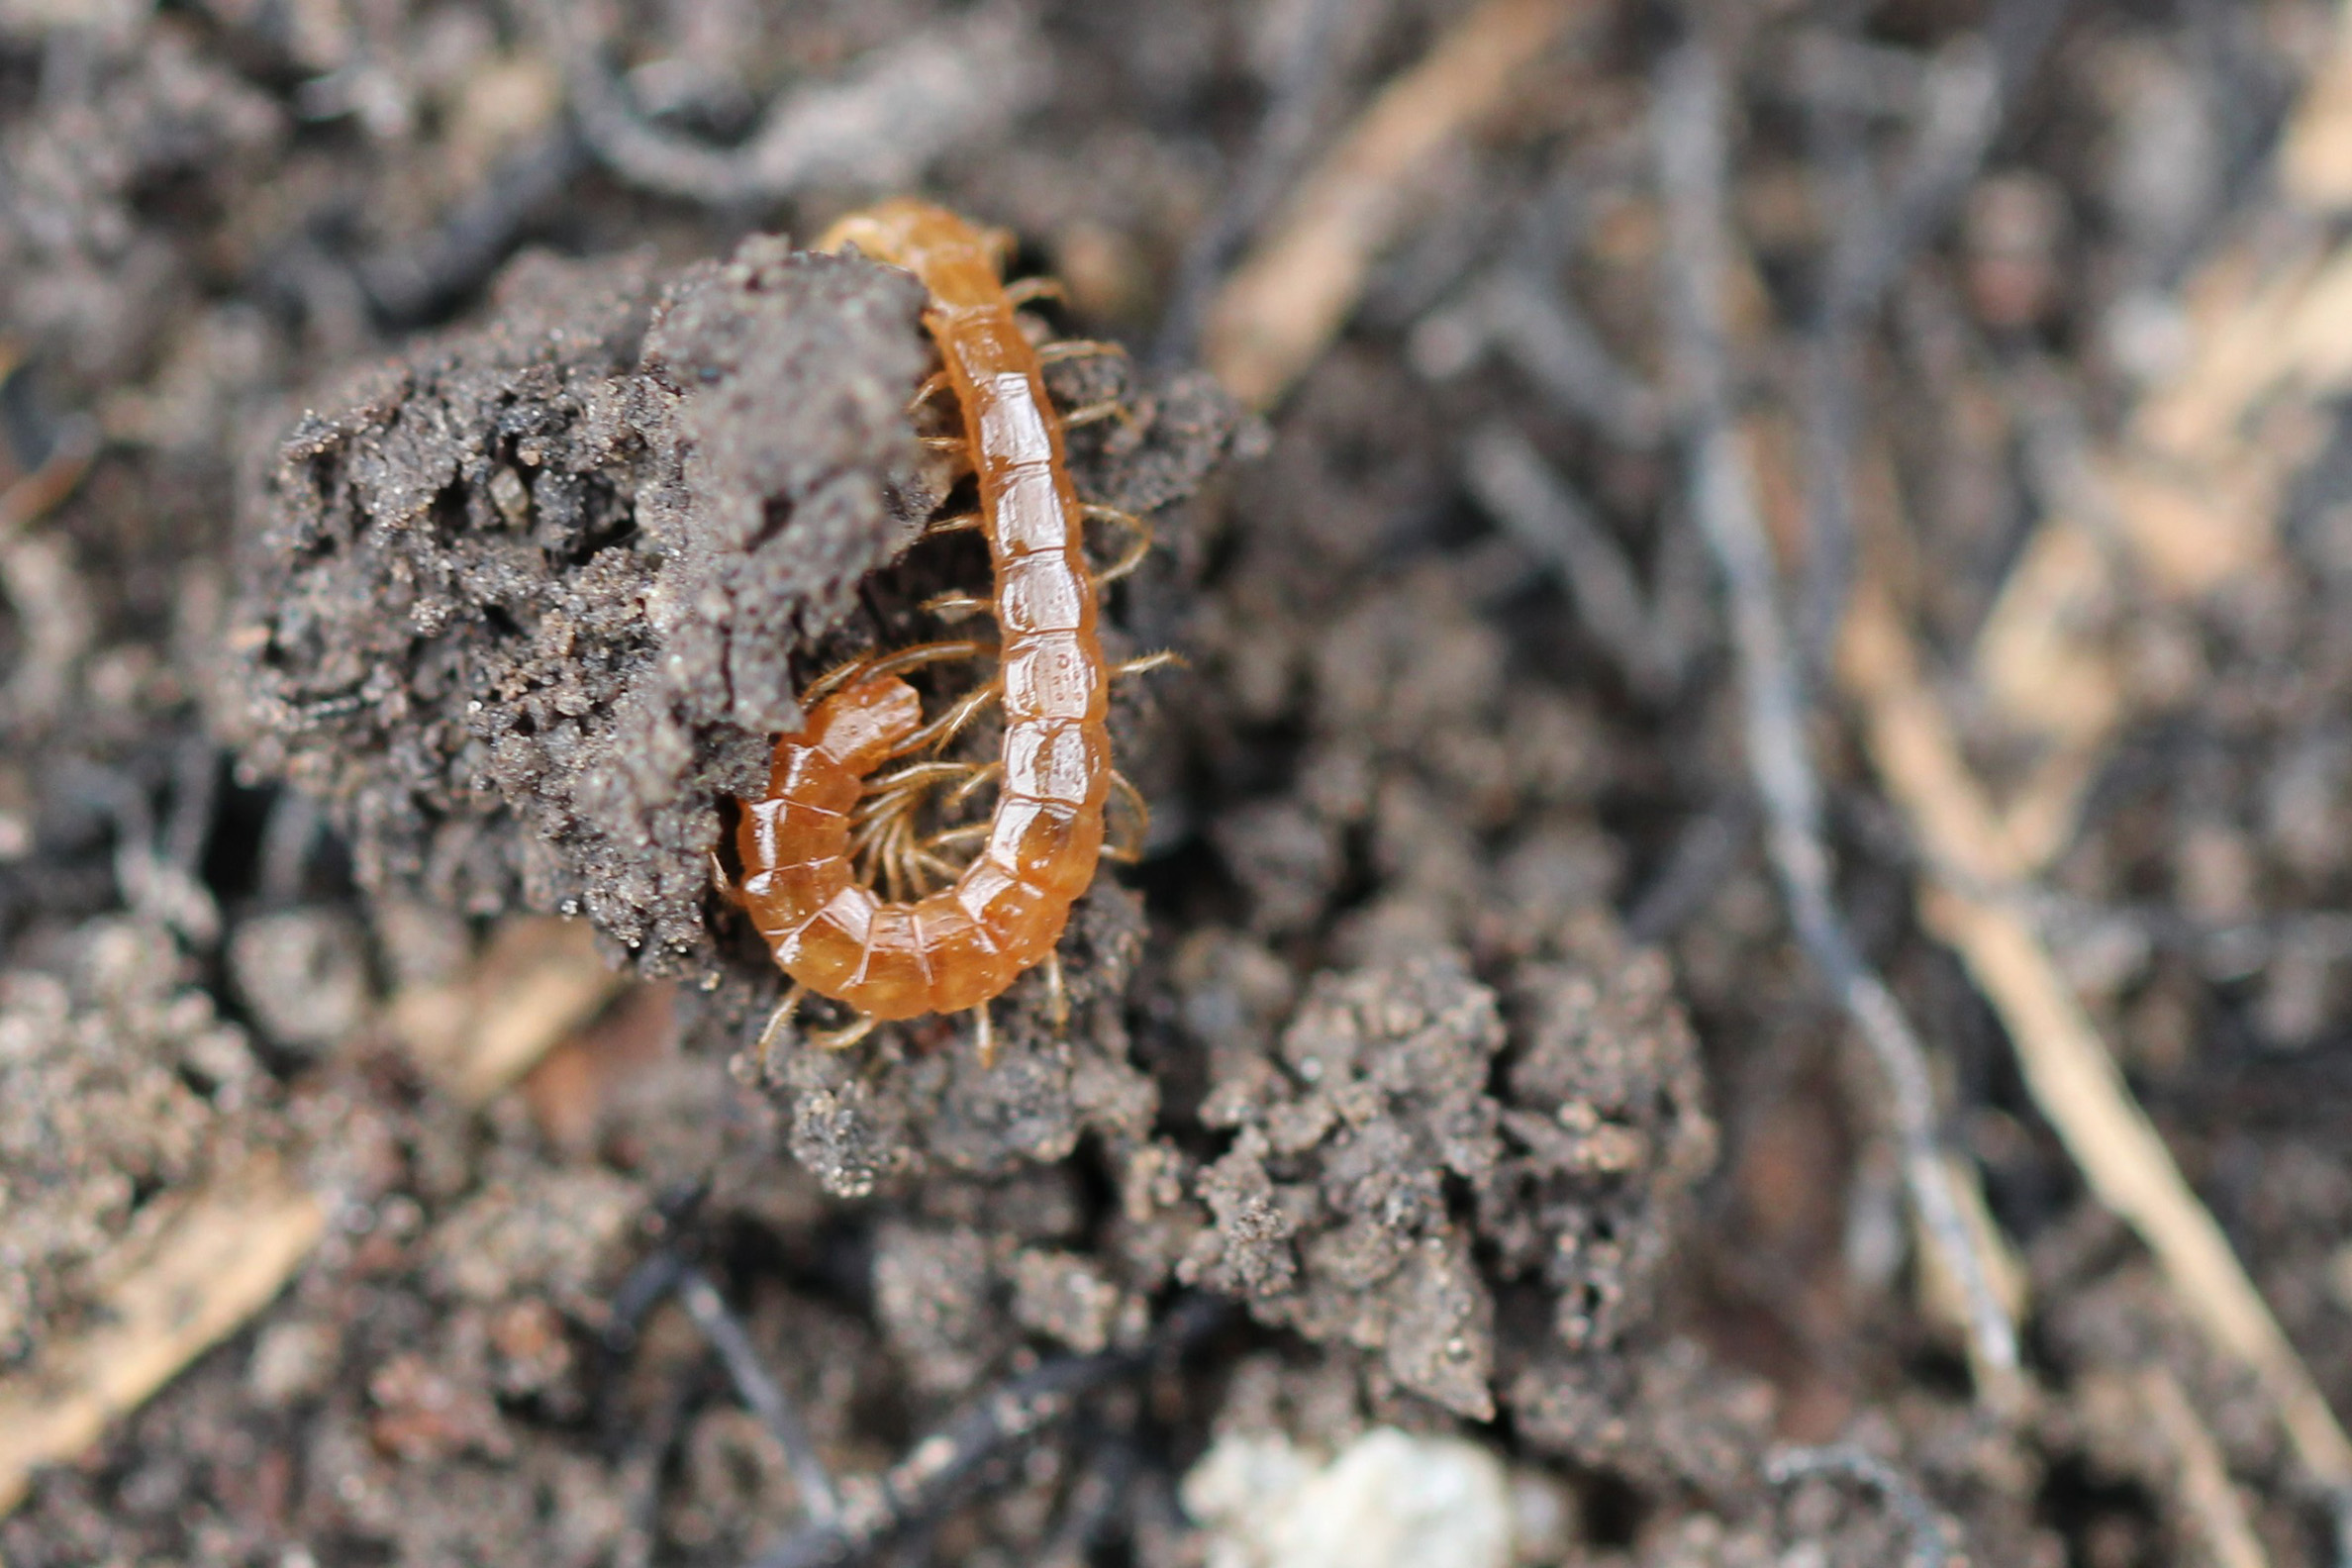 The long coiled body of a brown centipede shines against the dark soil 